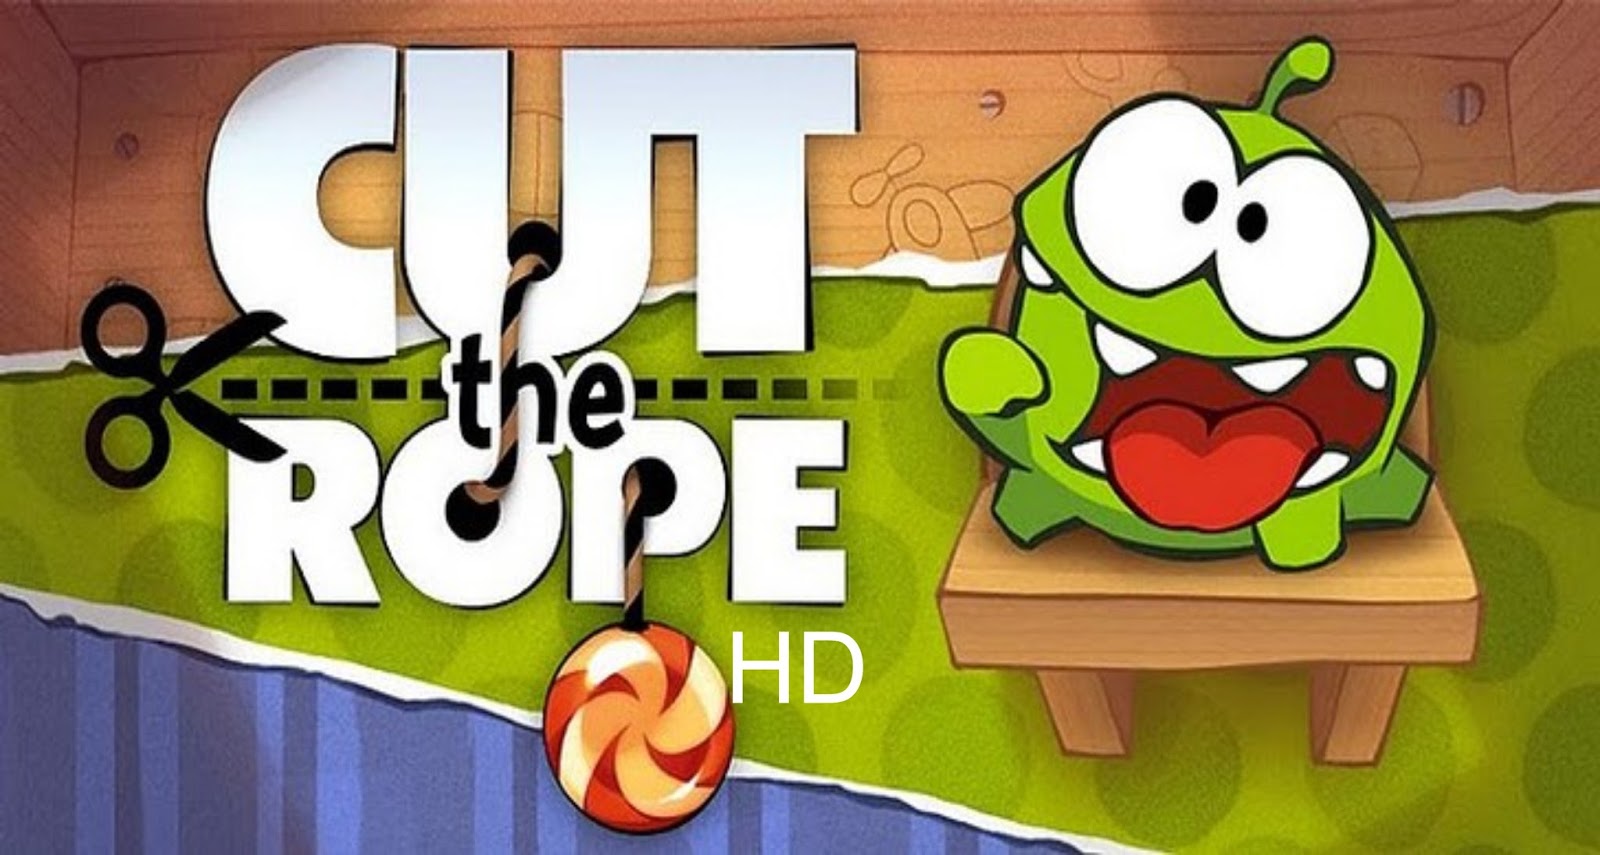 Cut the Rope HD v2.3.2 APK | Android Games Download